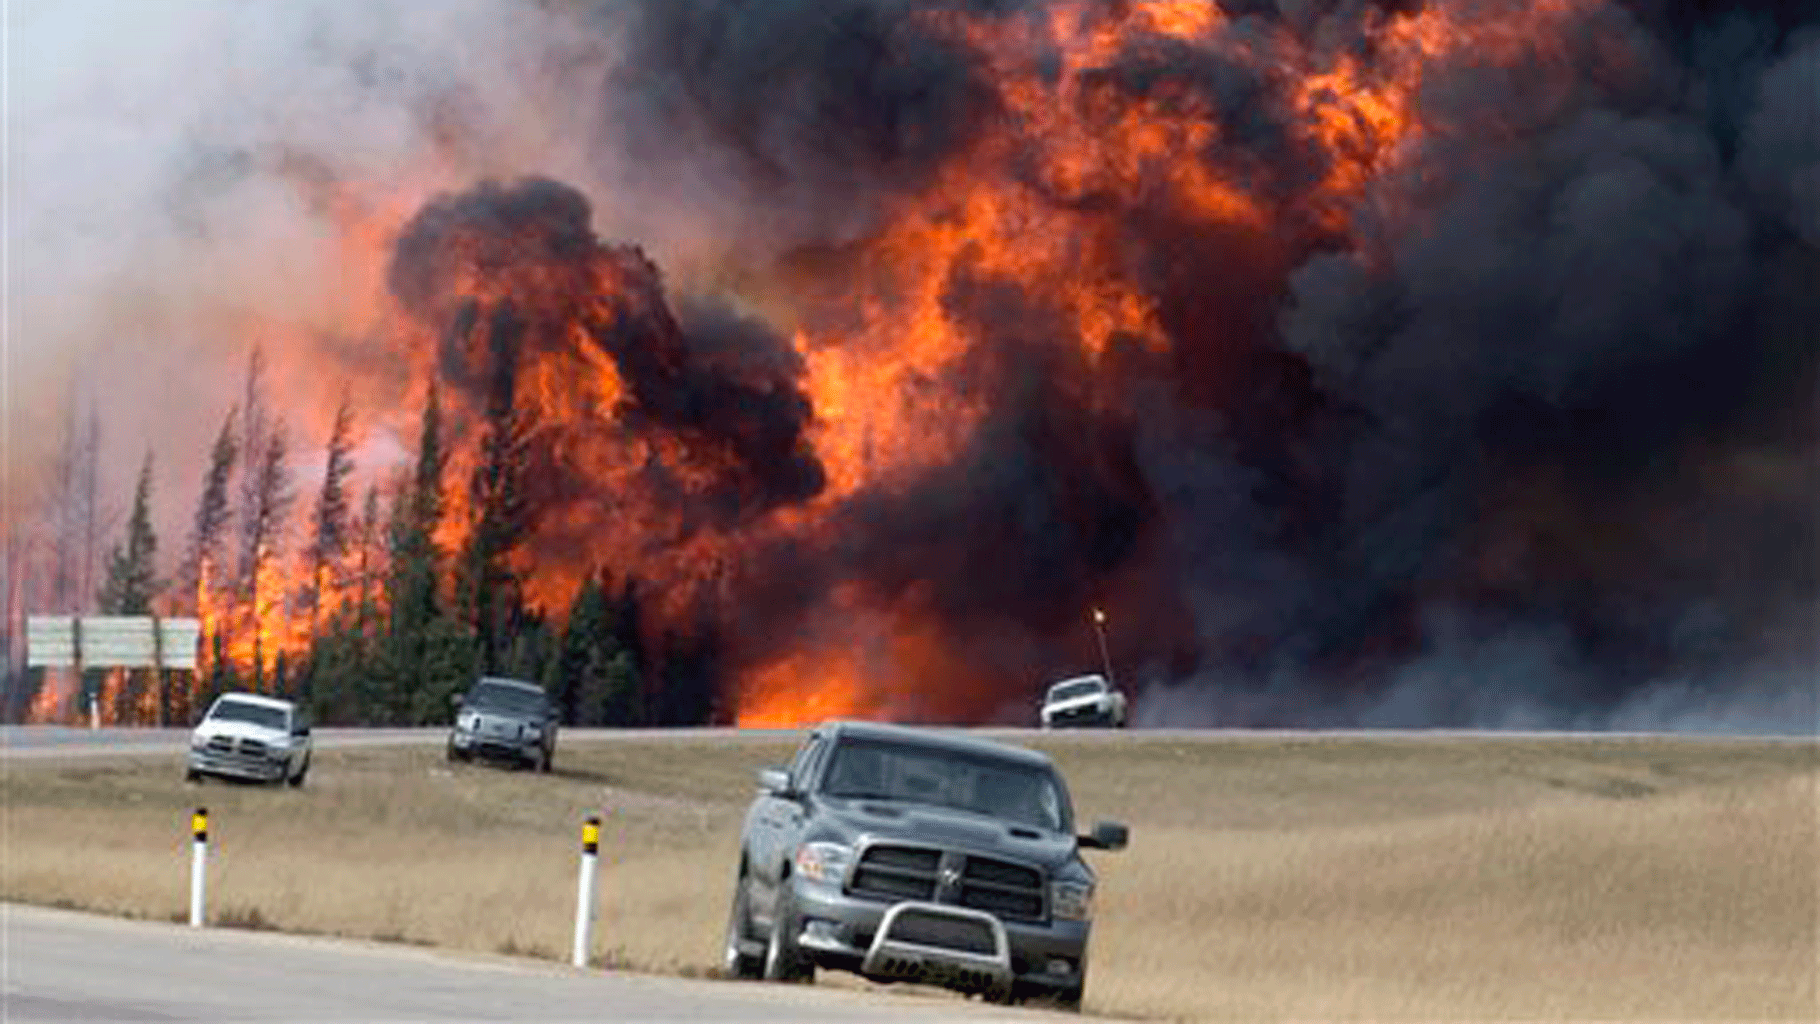 Canadian officials fear the growing wildfire could double in size and reach a major oil sands mine and even the neighbouring province of Saskatchewan. (Photo: Jason Franson/The Canadian Press via AP)